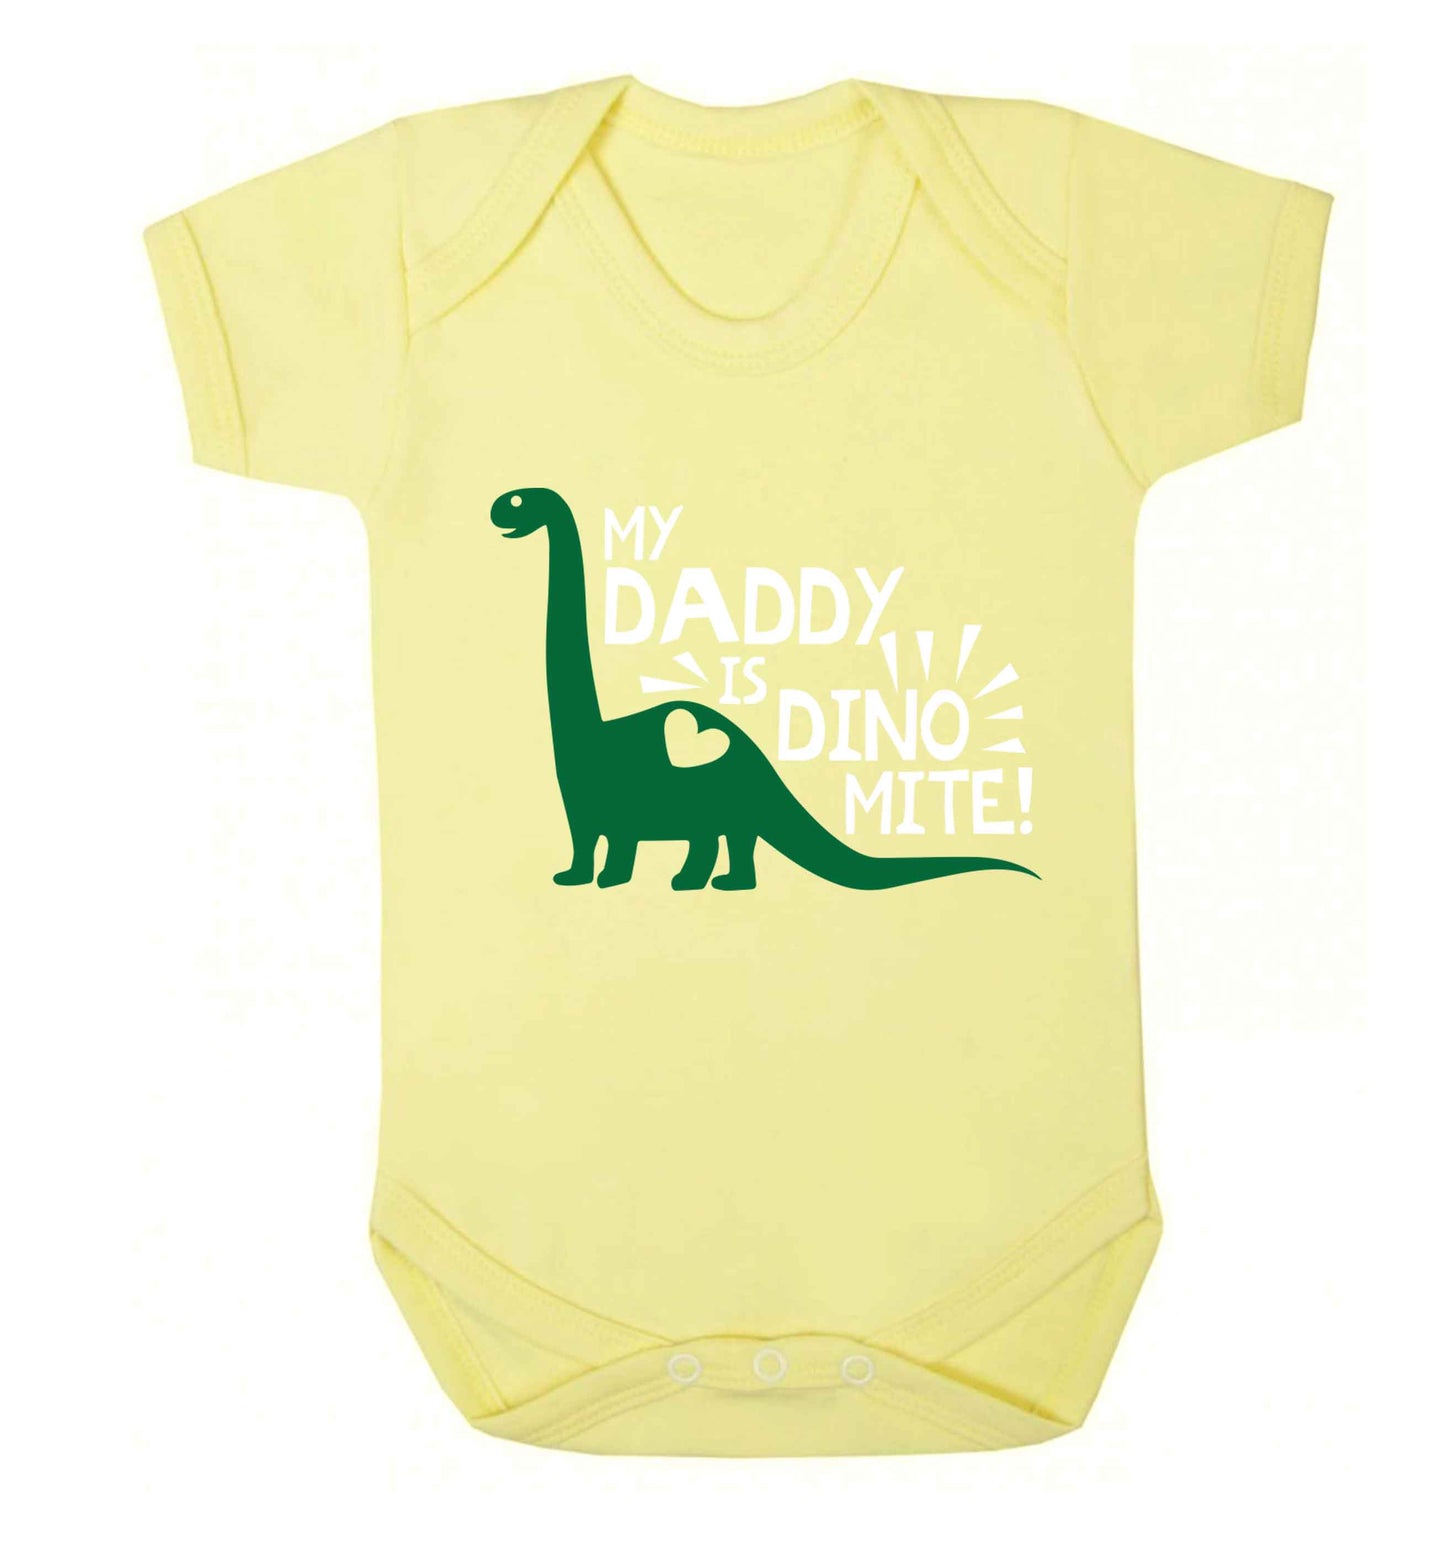 My daddy is dinomite! Baby Vest pale yellow 18-24 months